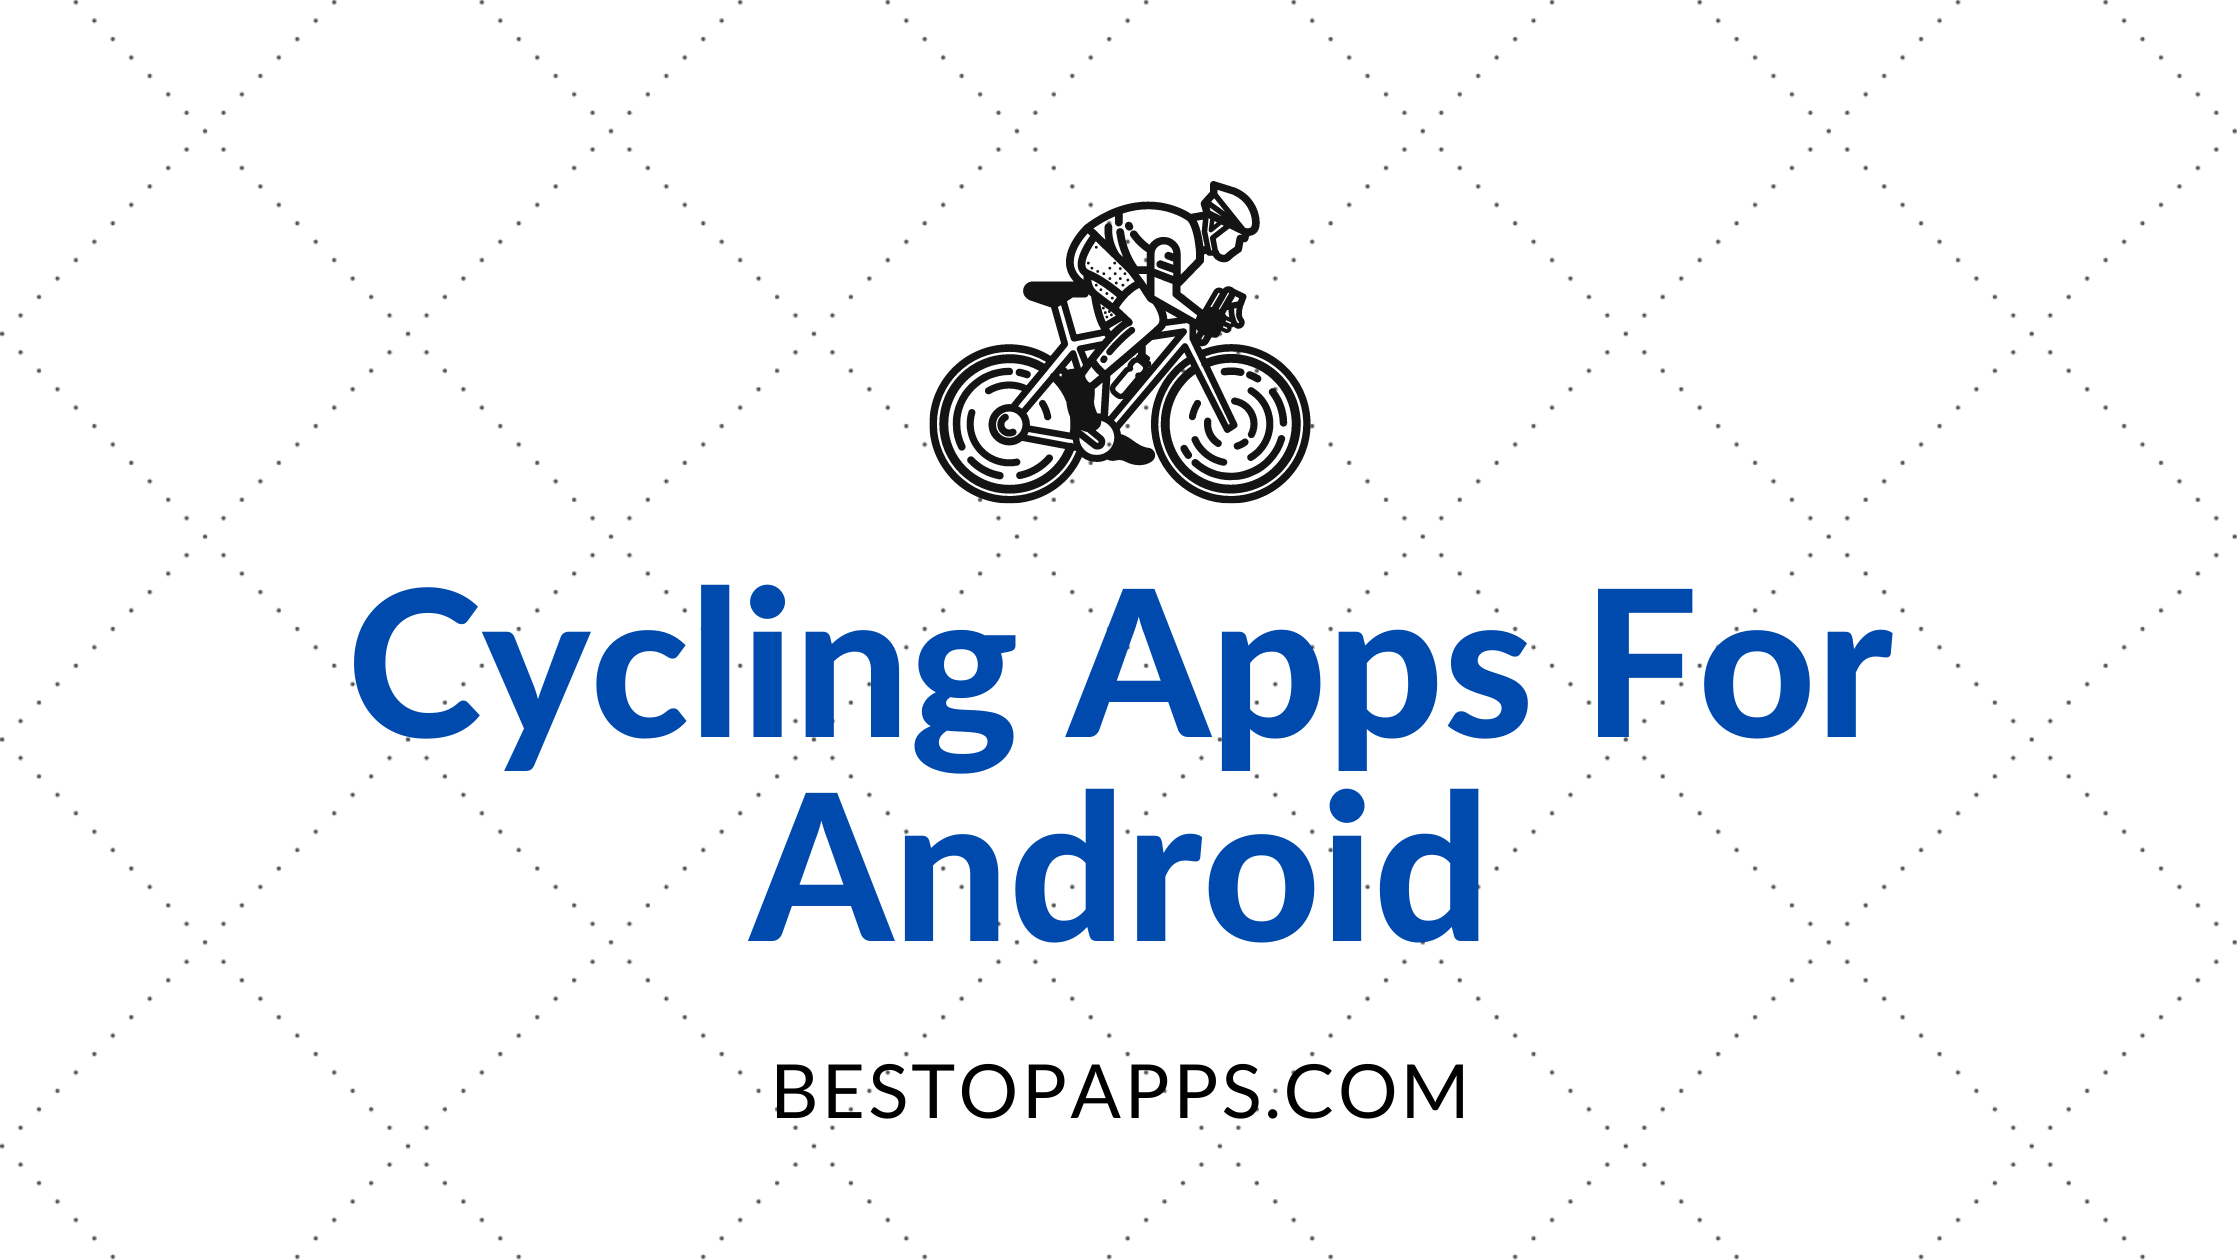 Cycling Apps For Android